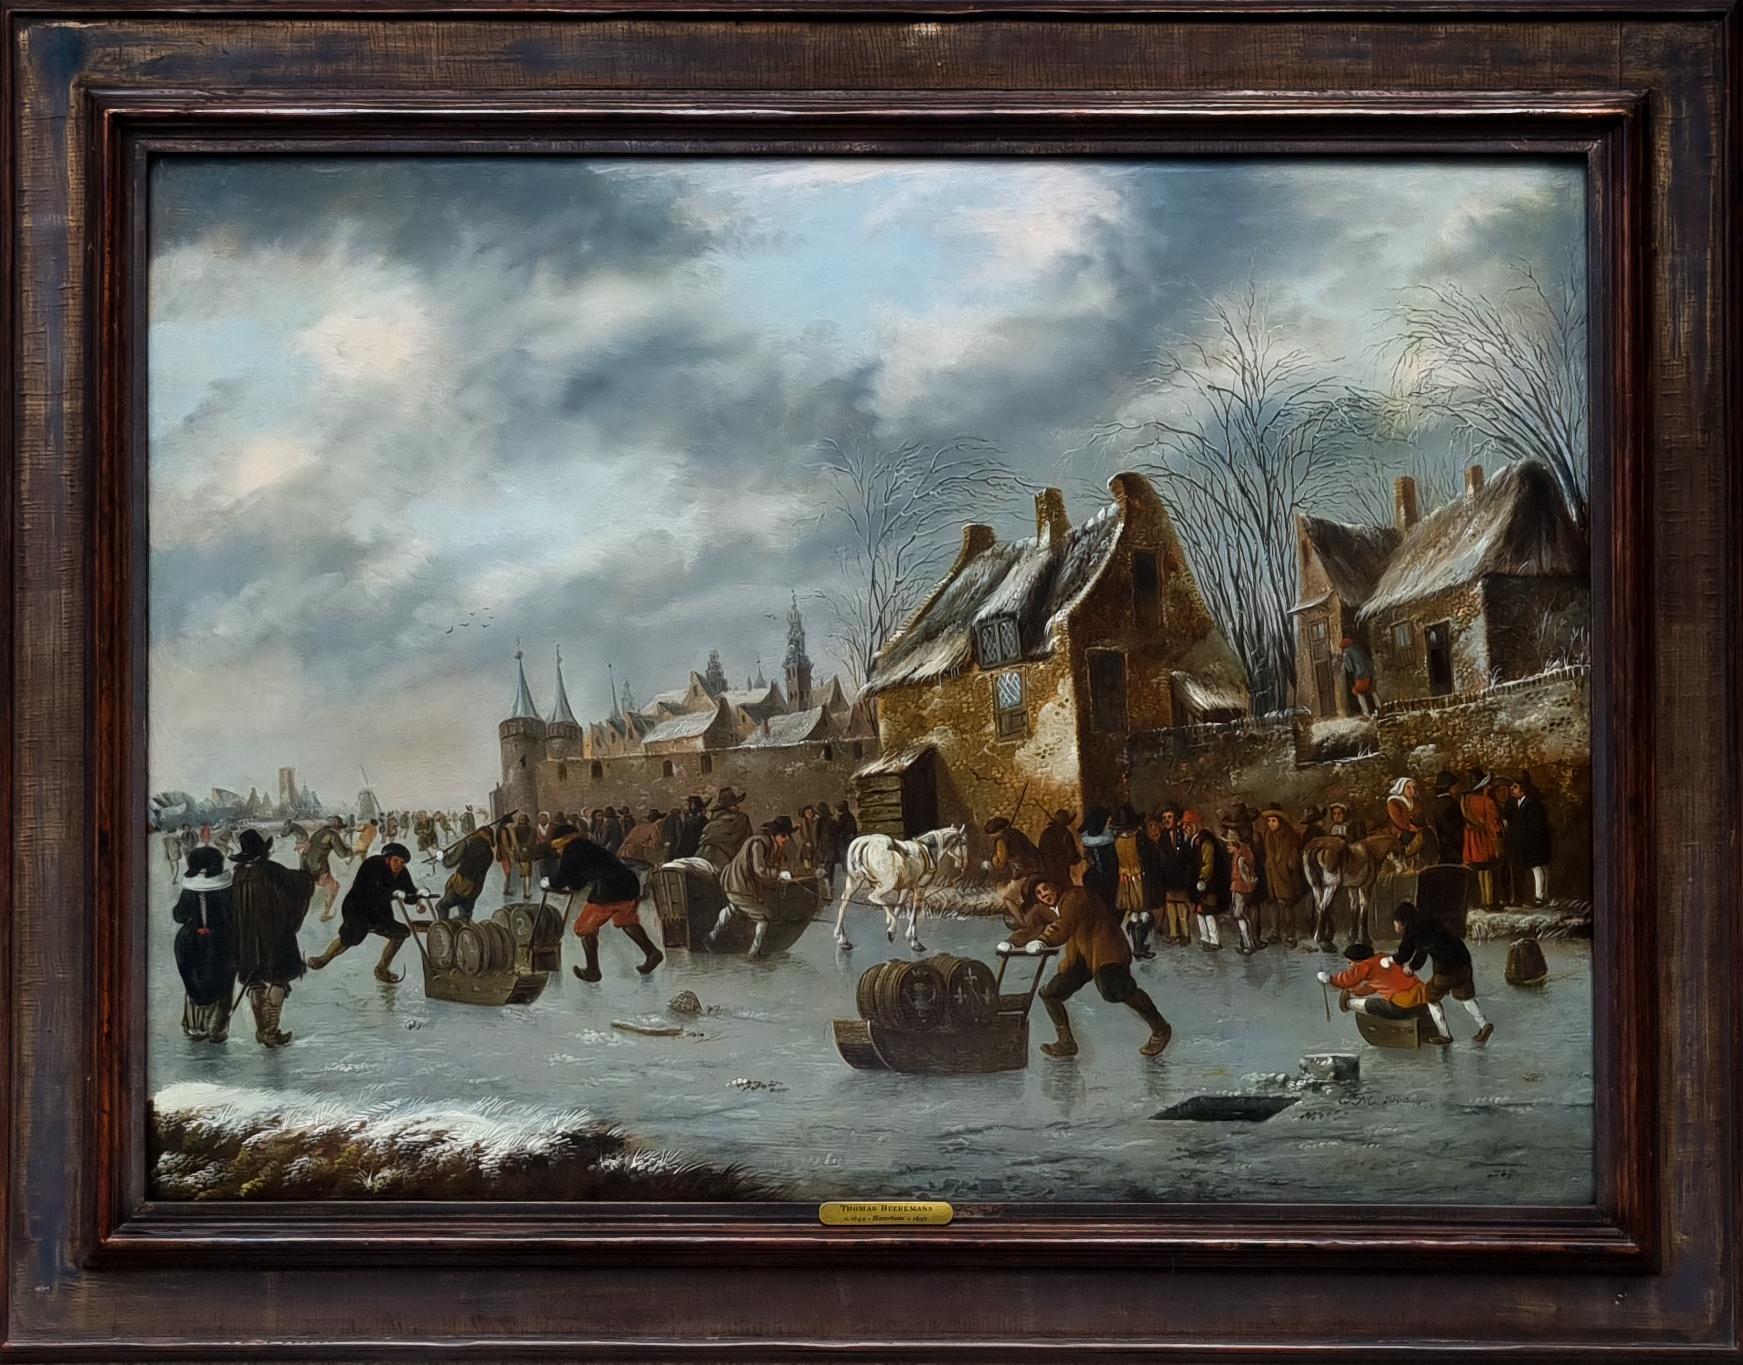 The painting depicts a lively scene from a frozen river outside the town walls, where a large crowd have gathered to skate and mingle.  North-Western Europe went through a small ice age from circa 1550 until the middle of the 19th century, where two